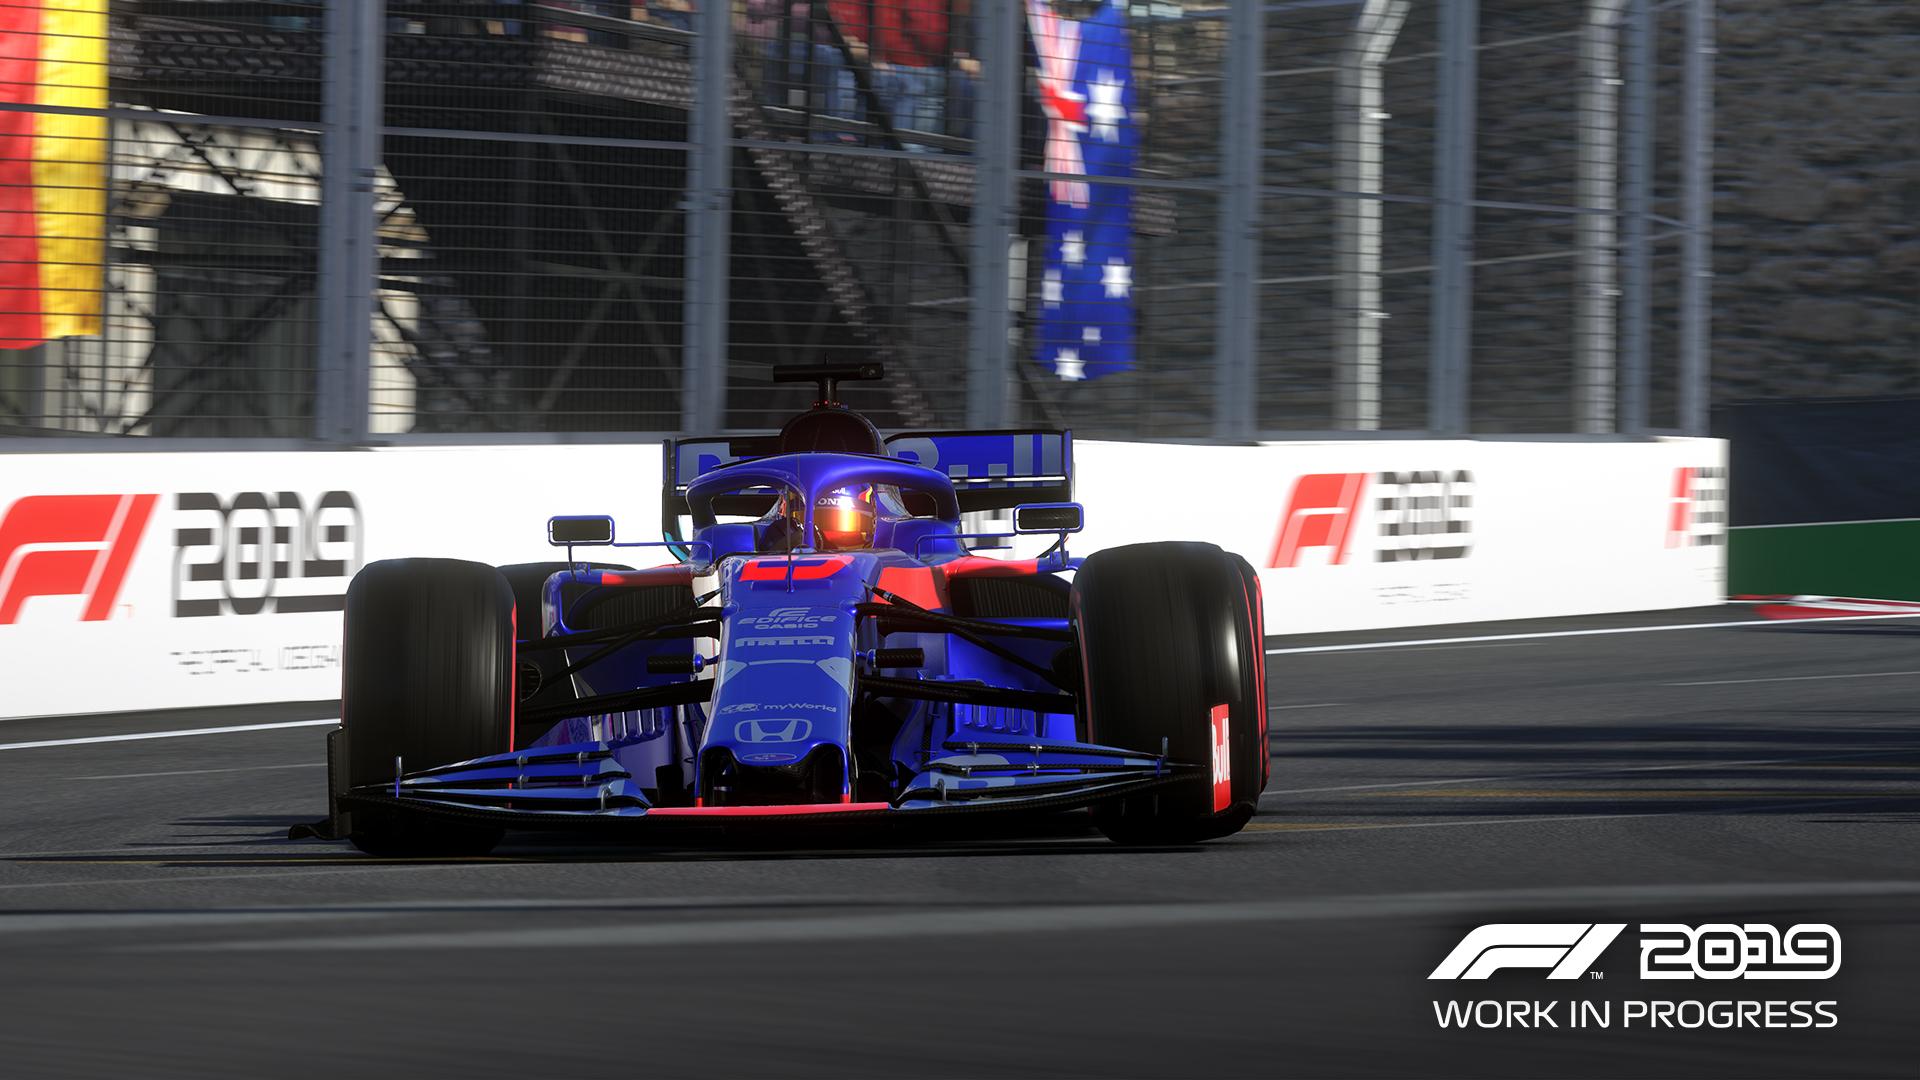 F1 2019 is Codemasters' Most Authentic Formula 1 Game Yet